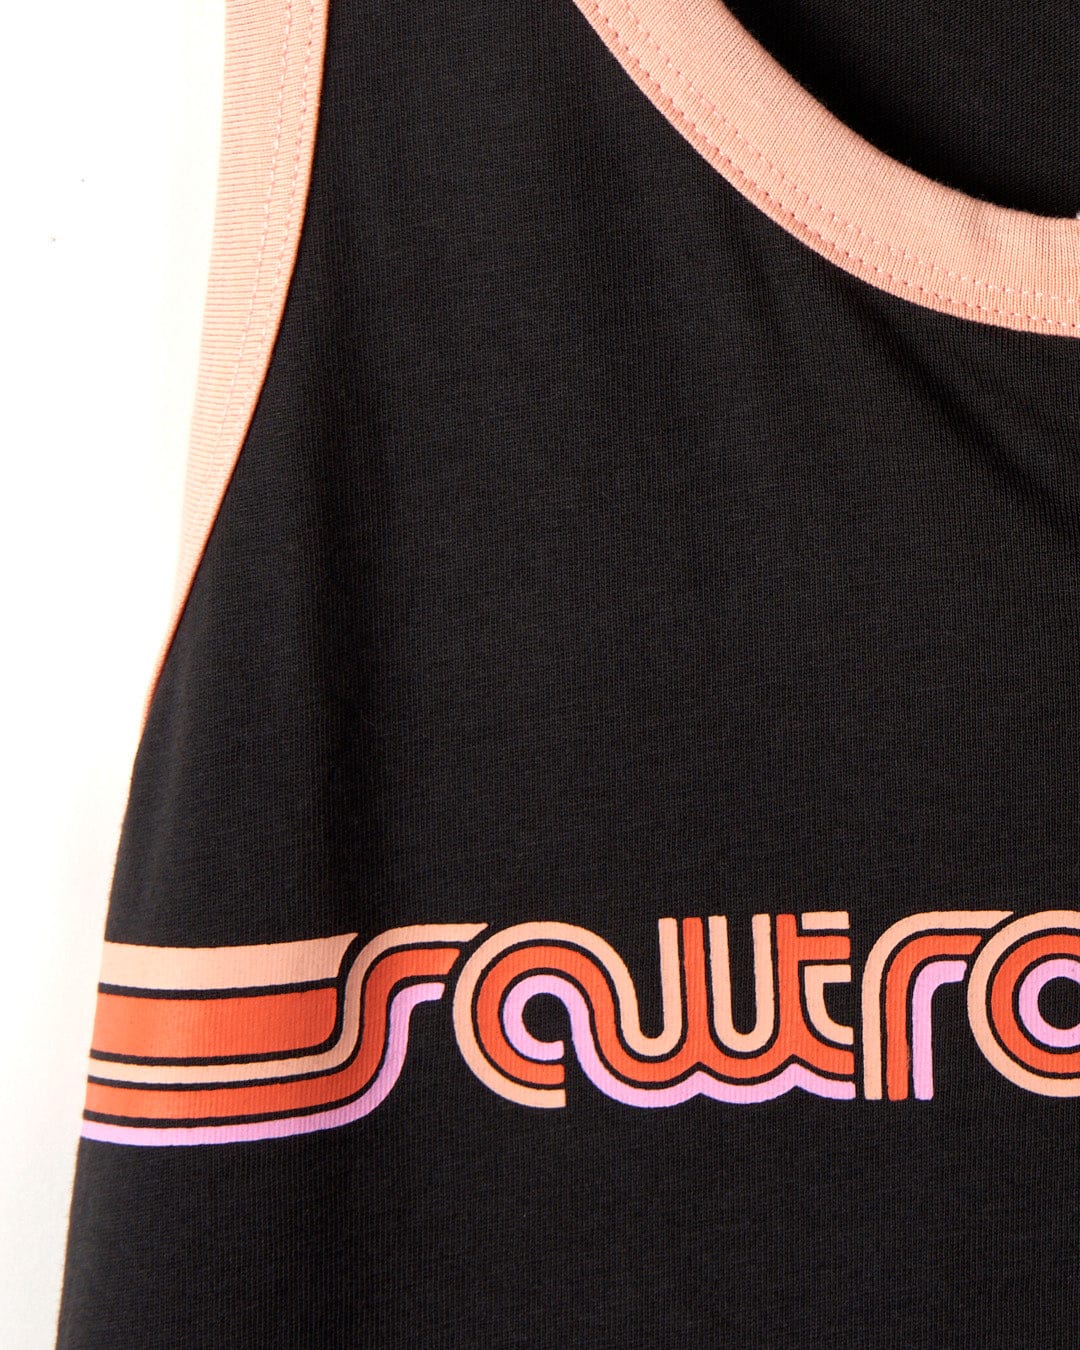 Close-up of a black fabric with the word "Saltrock" in stylized orange and pink lettering along the hem, featuring a Retro Ribbon - Womens Vest - Dark Grey stripe.